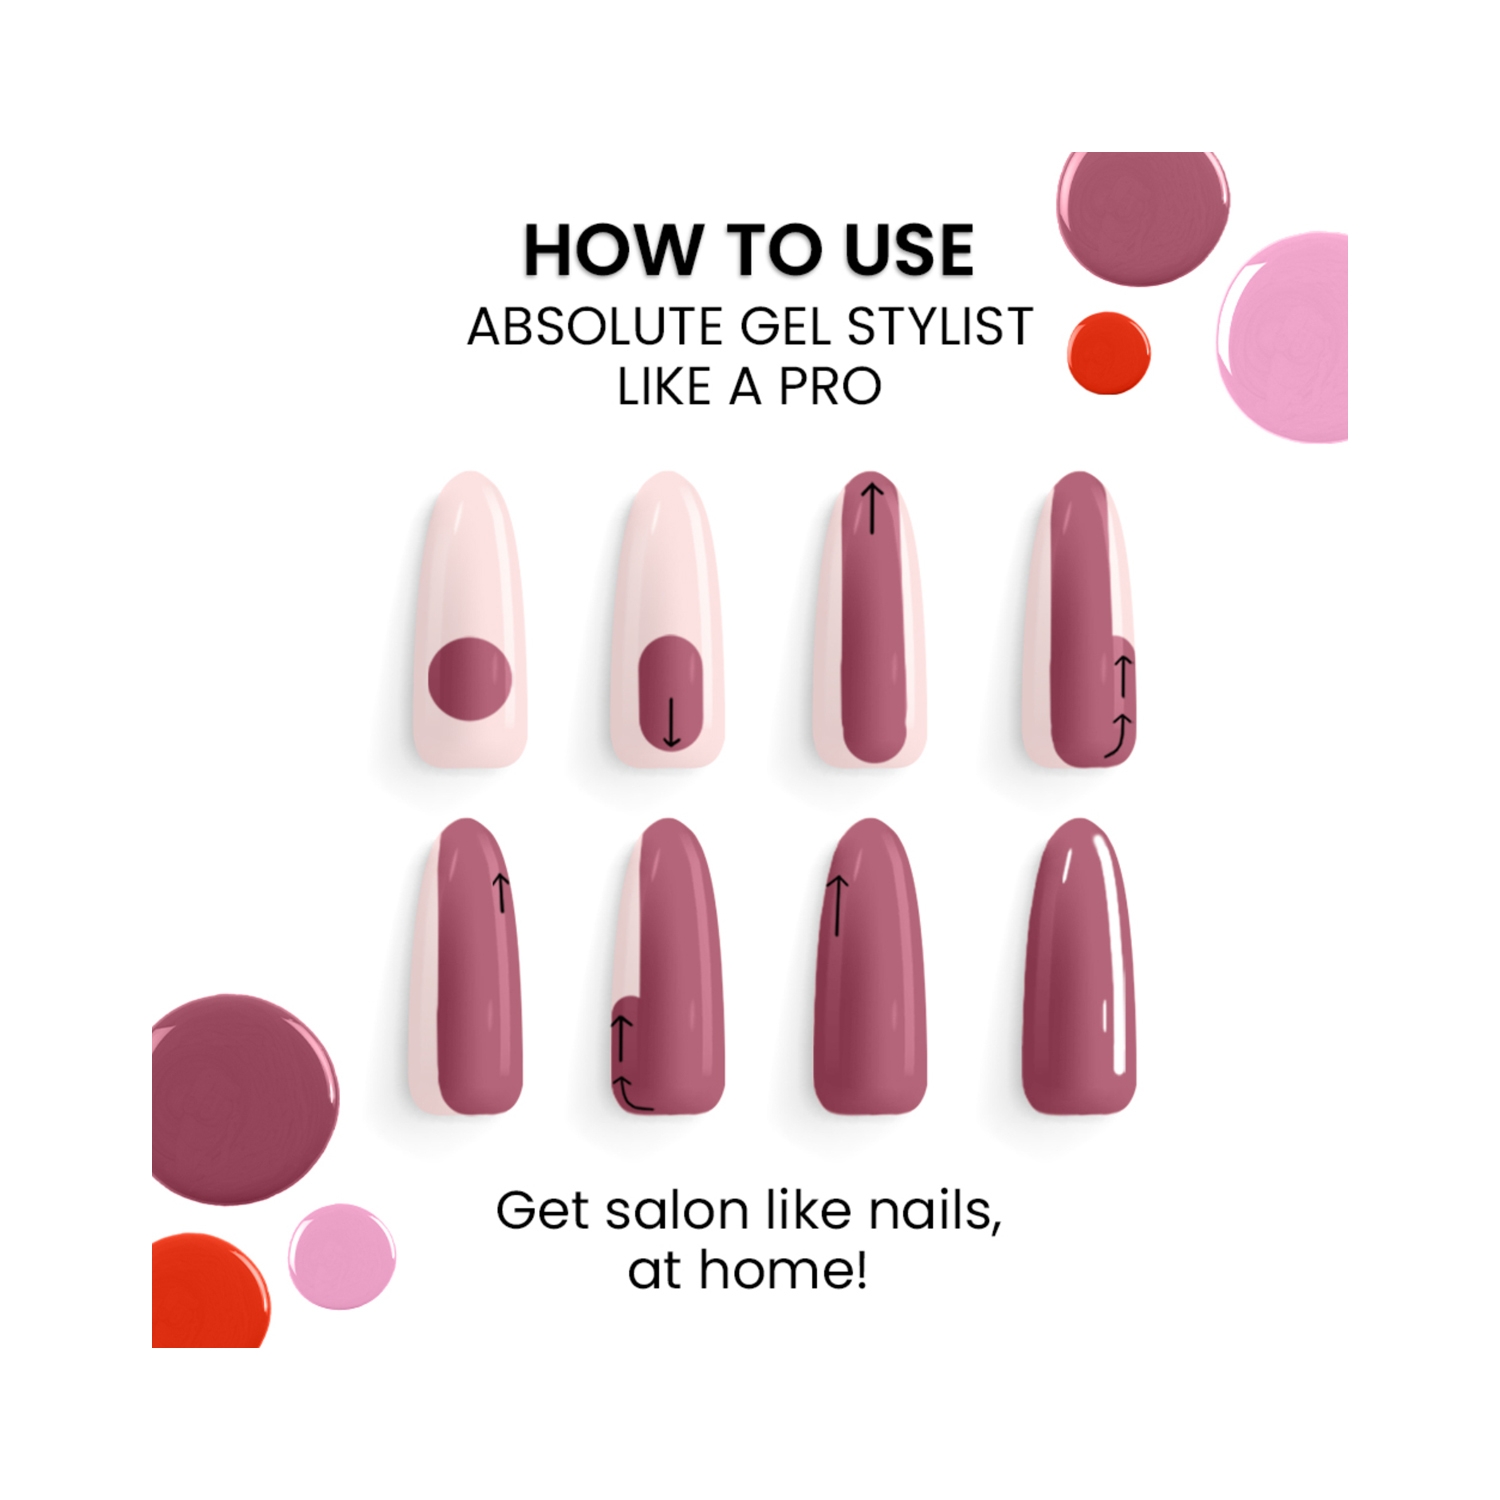 Buy Driya vegan 16 toxin free gel finish quick dry chip resistant long  lasting Nailpolish combo set of 3 ( Dolled Up, Be Leaf, Spiced Coral )  Online at Low Prices in India - Amazon.in